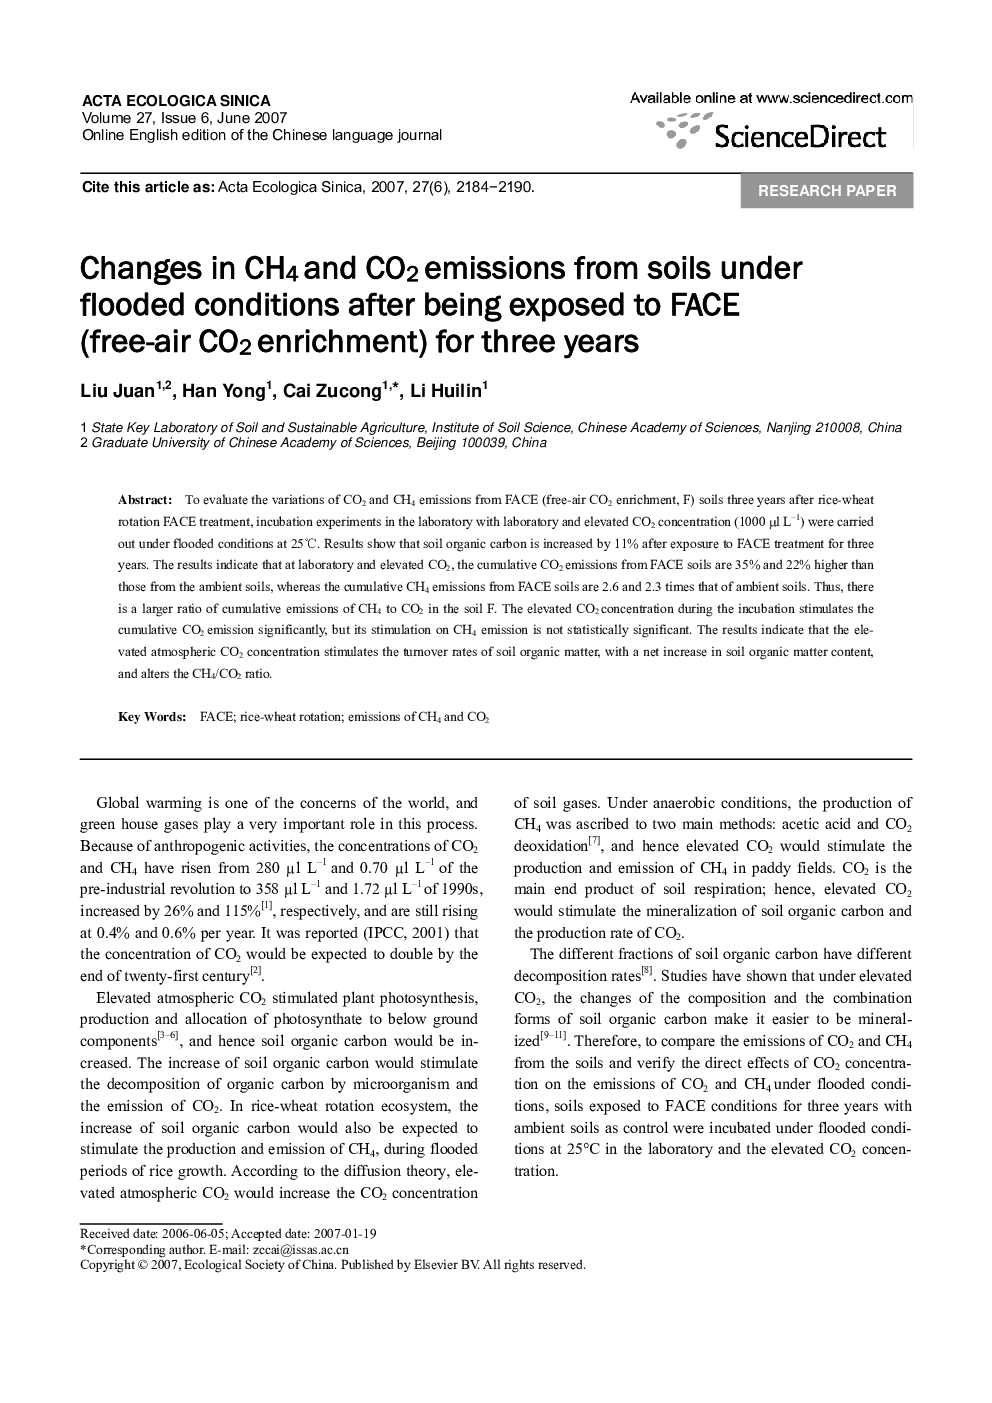 Changes in CH4 and CO2 emissions from soils under flooded conditions after being exposed to FACE (free-air CO2 enrichment) for three years